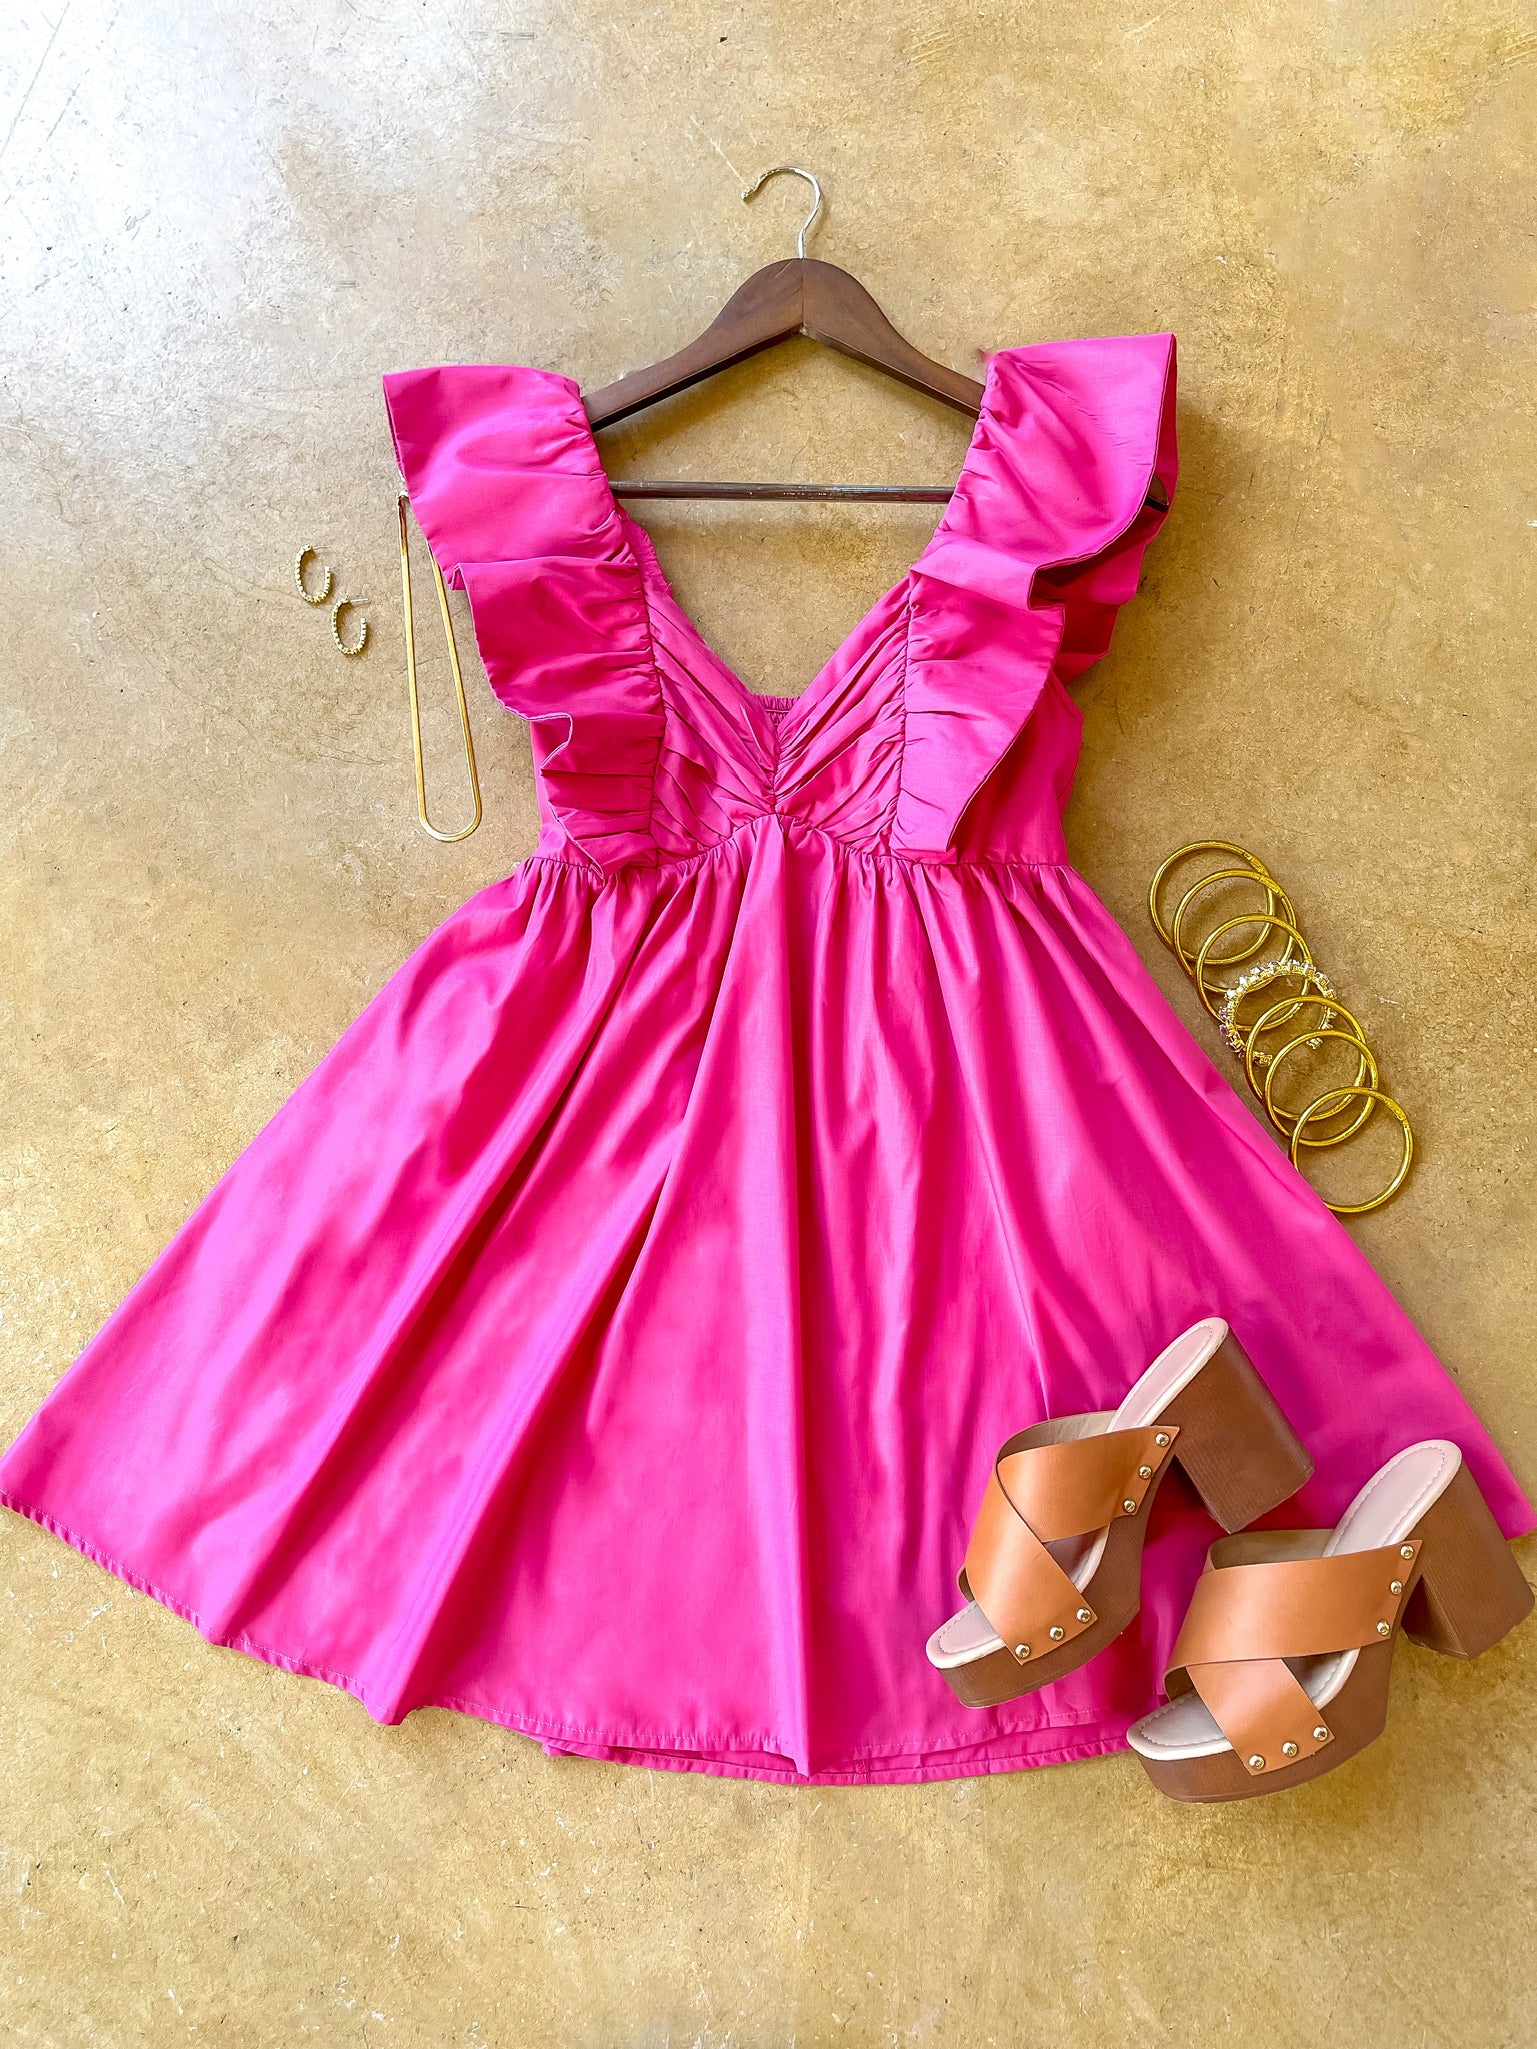 Pixie Perfect Ruffled Sleeve V Neck Dress in Pink - Giddy Up Glamour Boutique